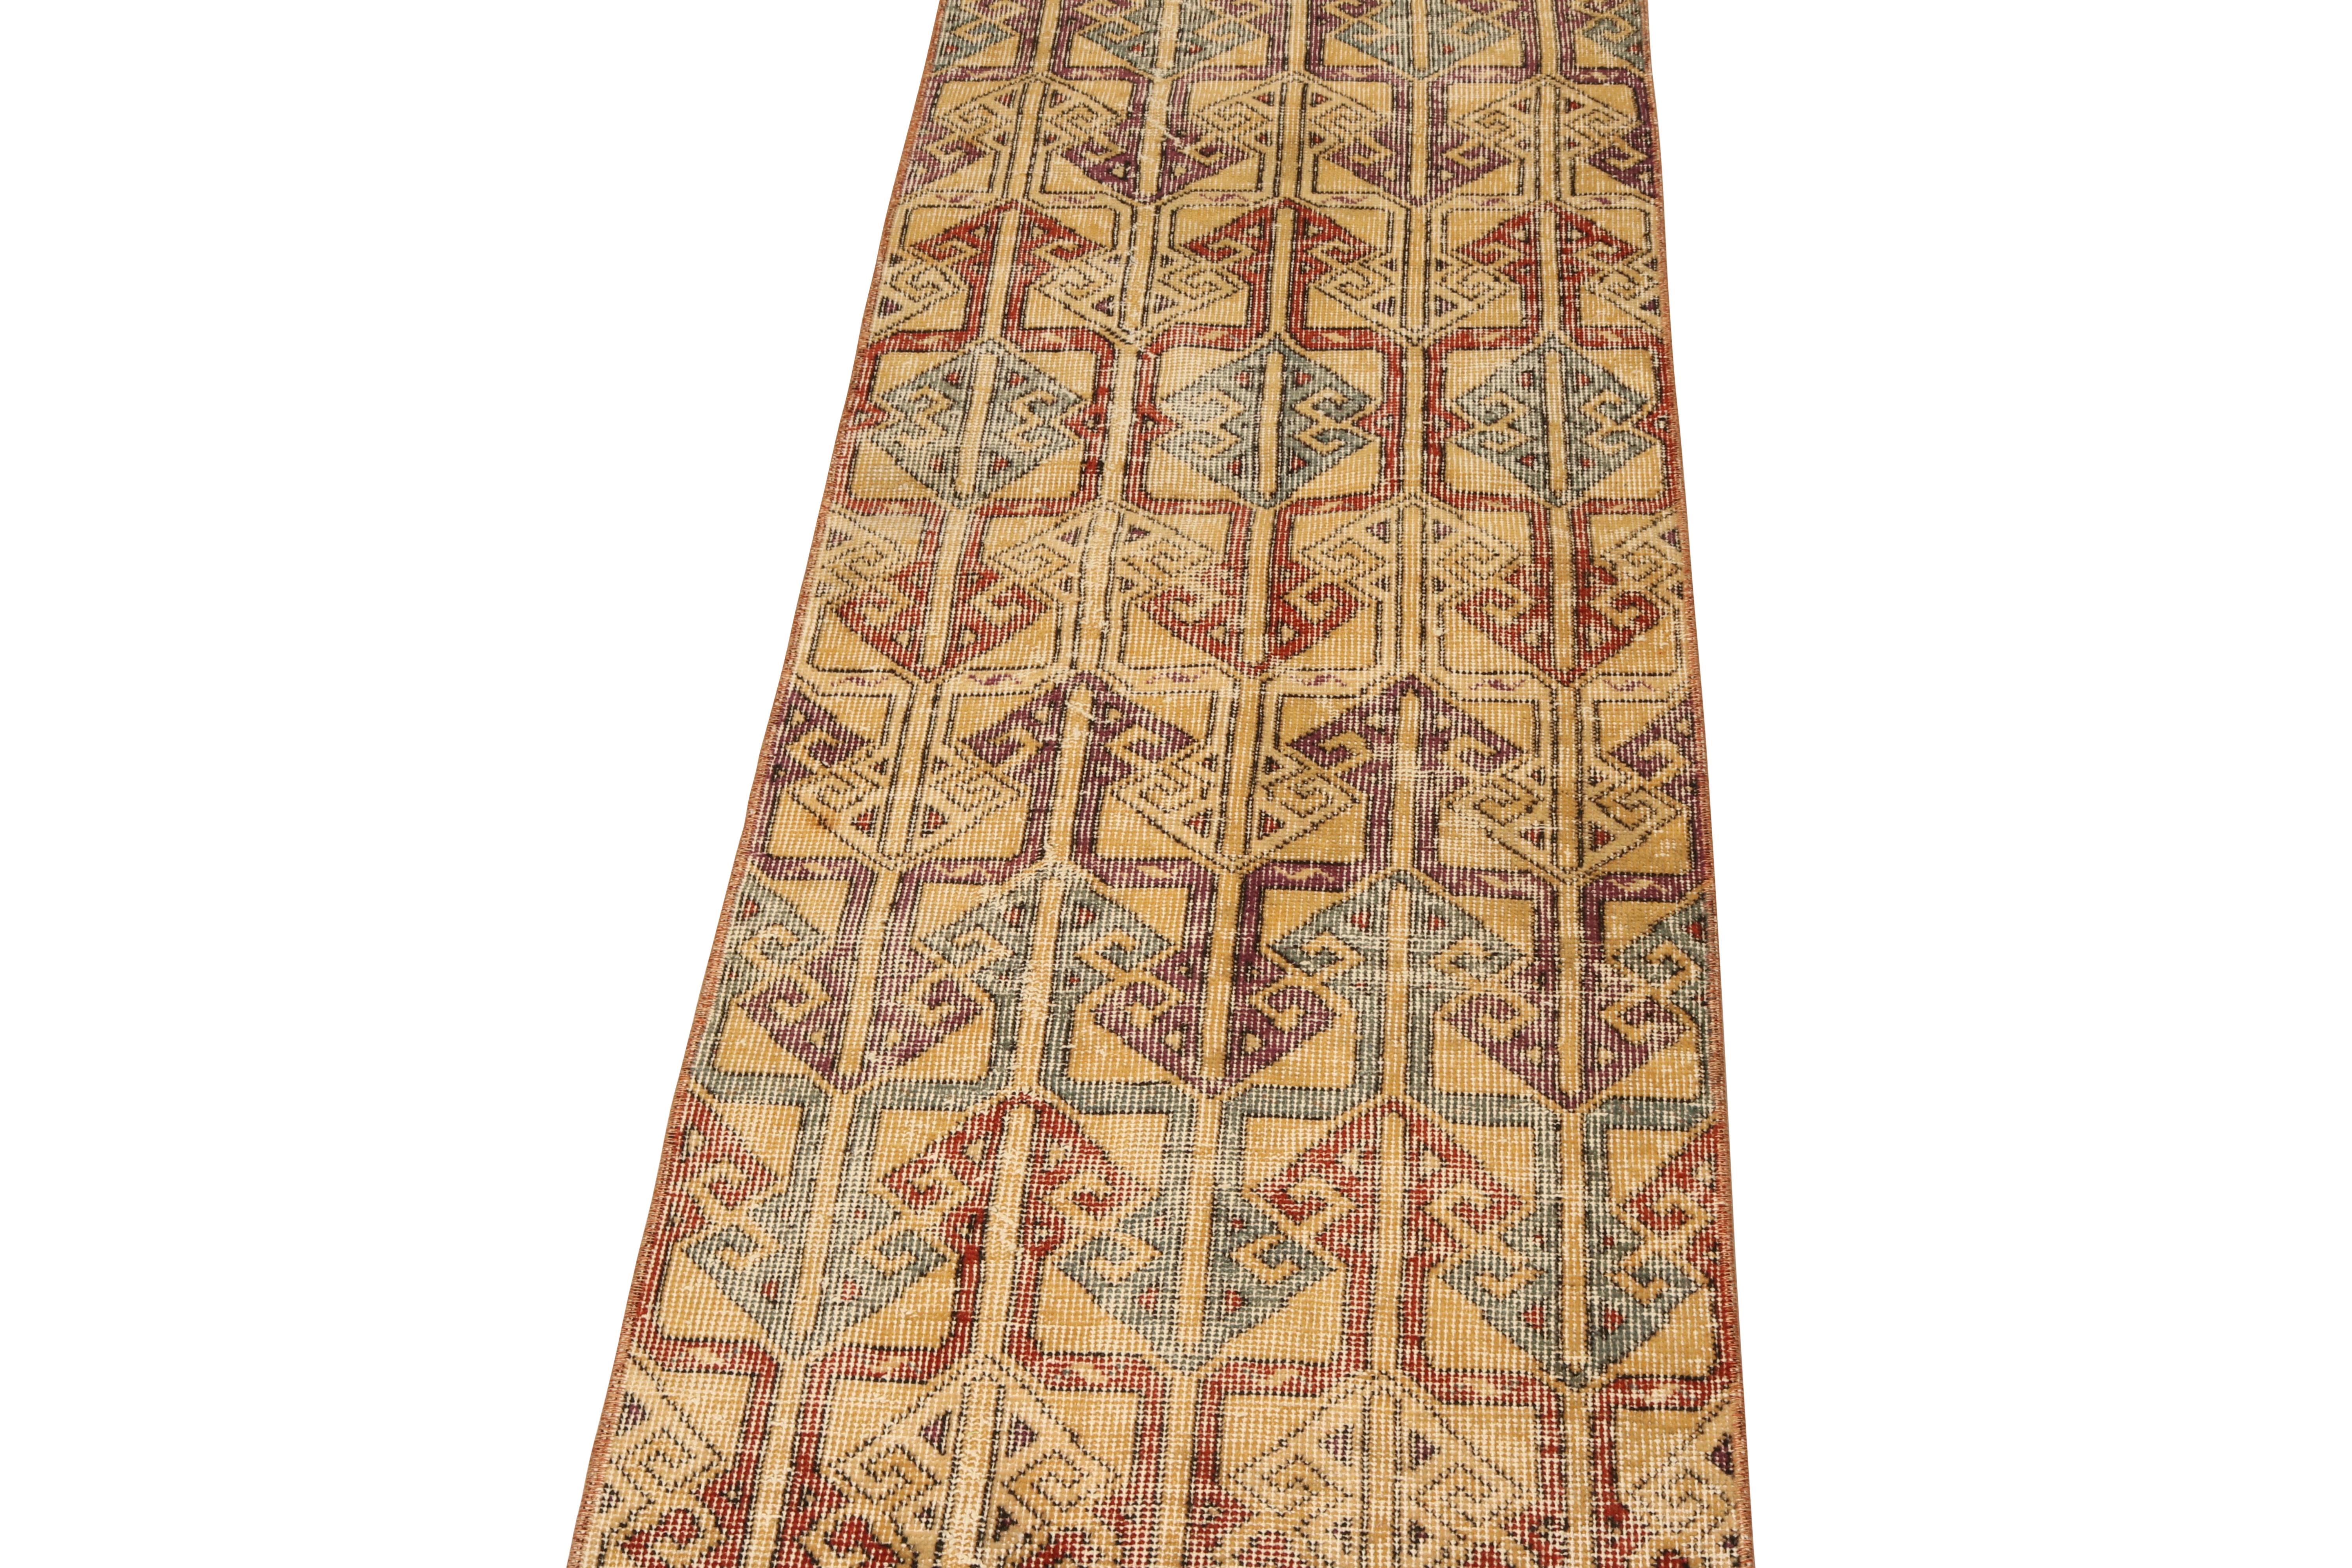 This vintage 2x6 rug is a new addition to Rug & Kilim’s Mid-Century Pasha Collection. This line is a commemoration, with rare curations we believe to hail from multidisciplinary Turkish designer Zeki Müren.

Further on the Design:

This industrial